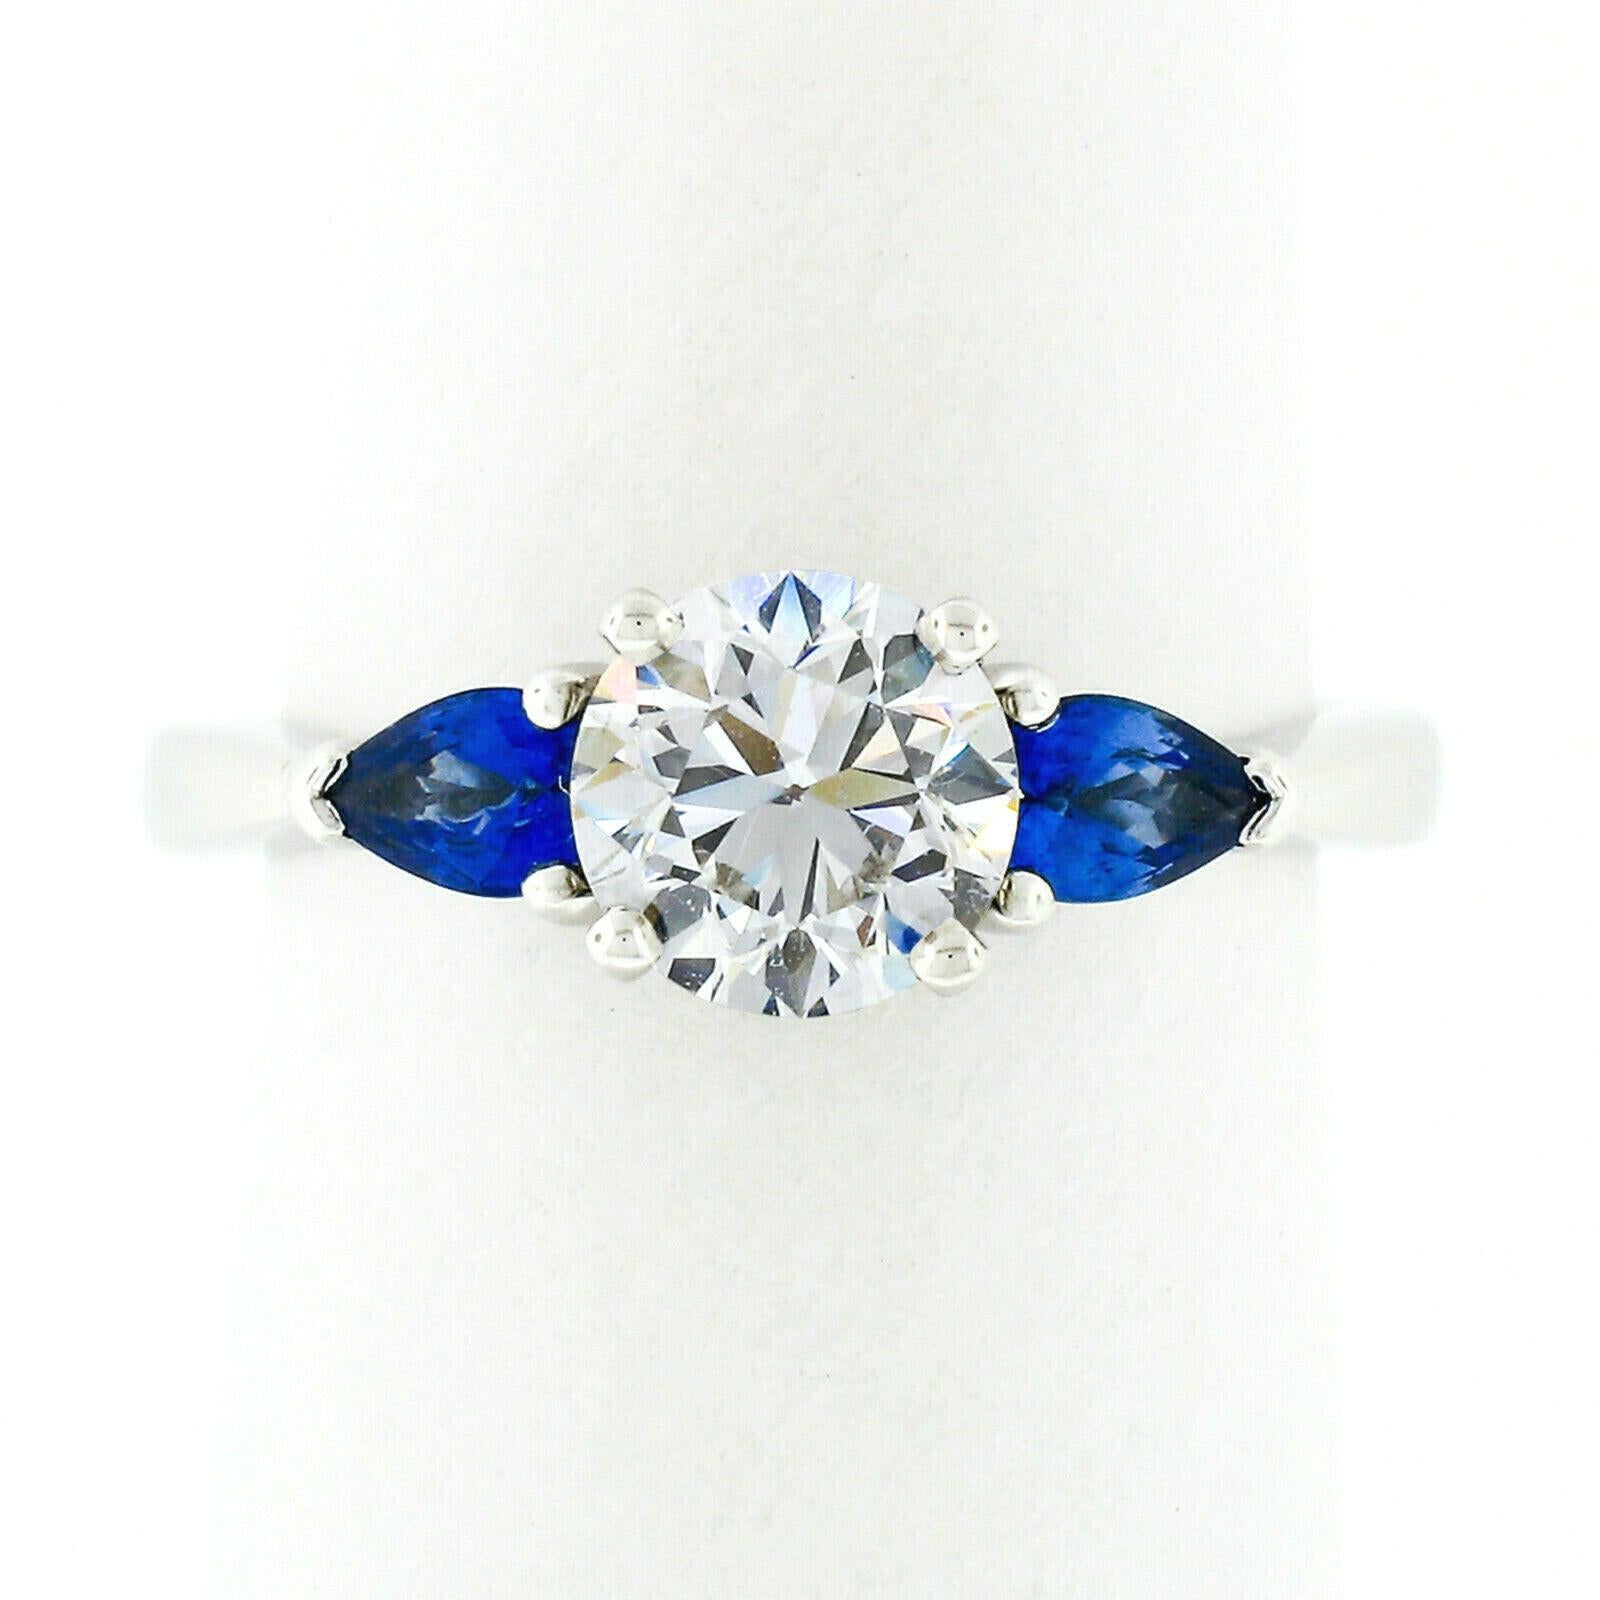 New 14k White Gold 1.03ct GIA Round Diamond & Sapphire 3 Stone Engagement Ring In New Condition For Sale In Montclair, NJ